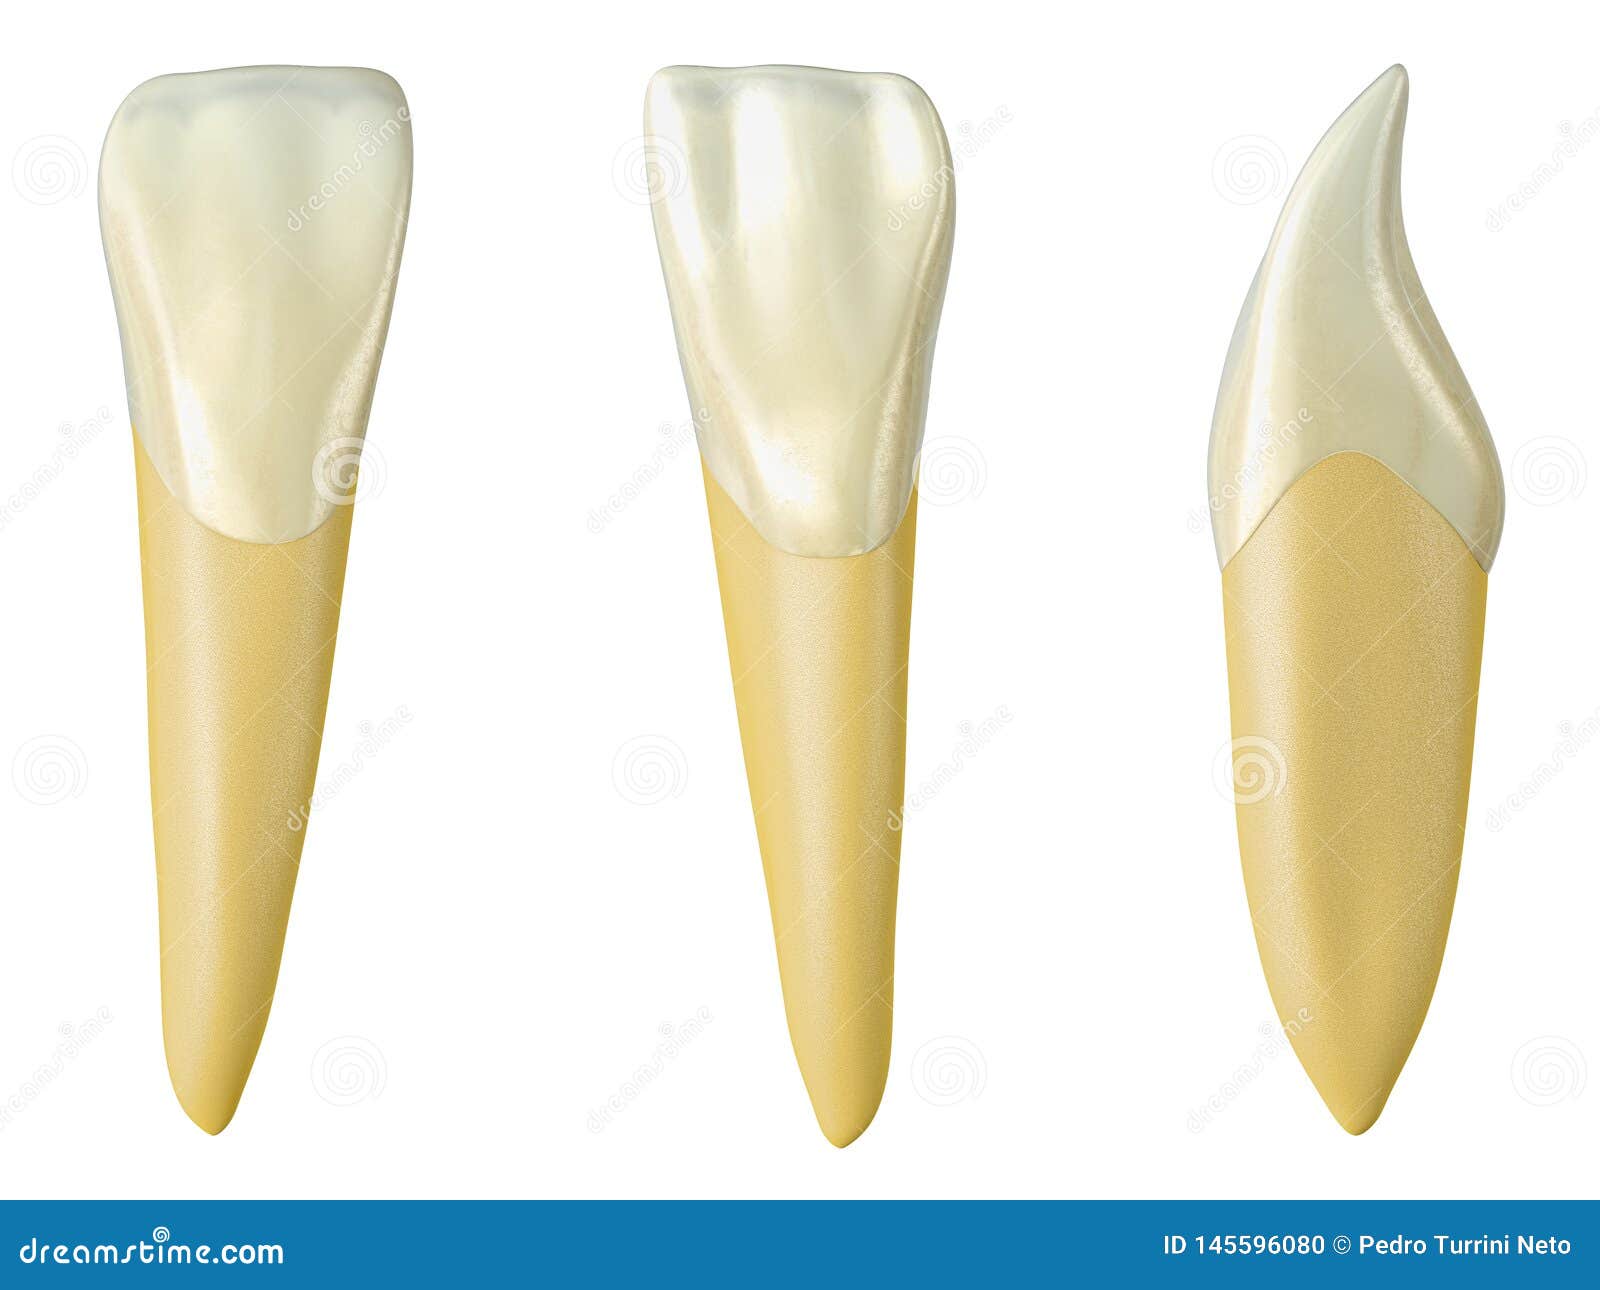 mandibular lateral incisor tooth in the buccal, palatal and lateral views. realistic 3d  of mandibular lateral incisor